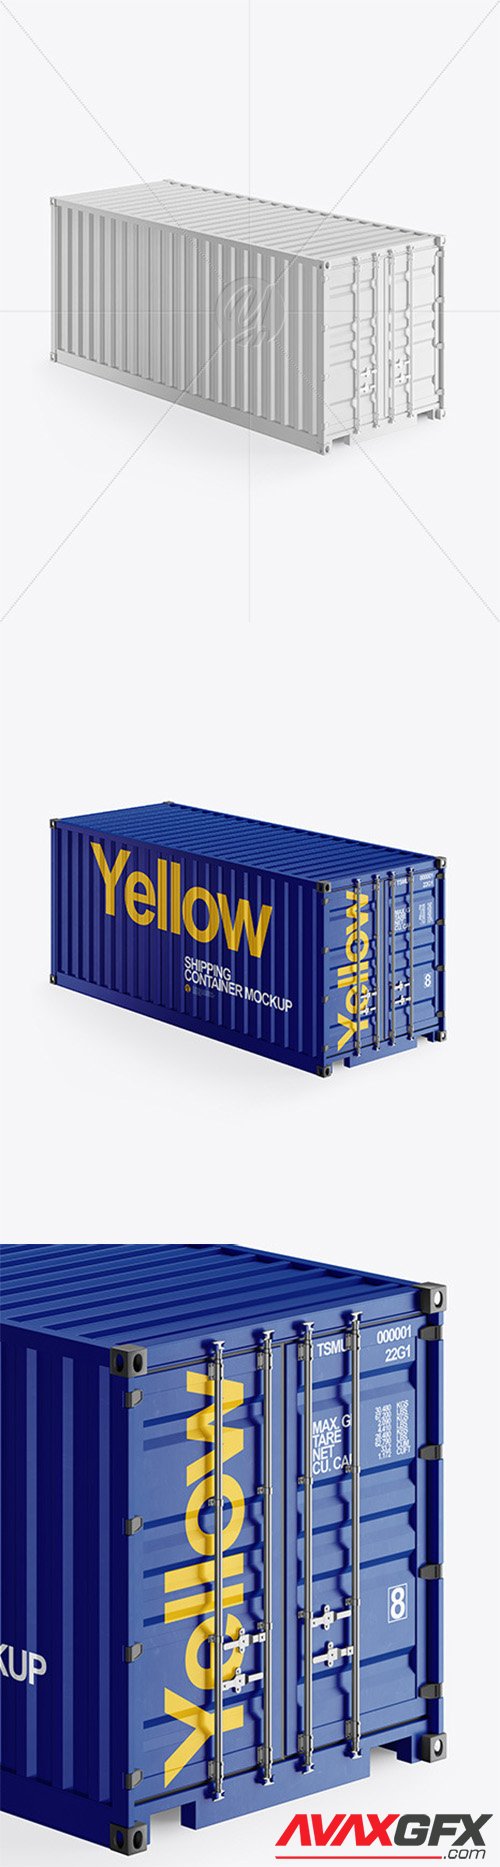 Shipping Container Mockup 63788